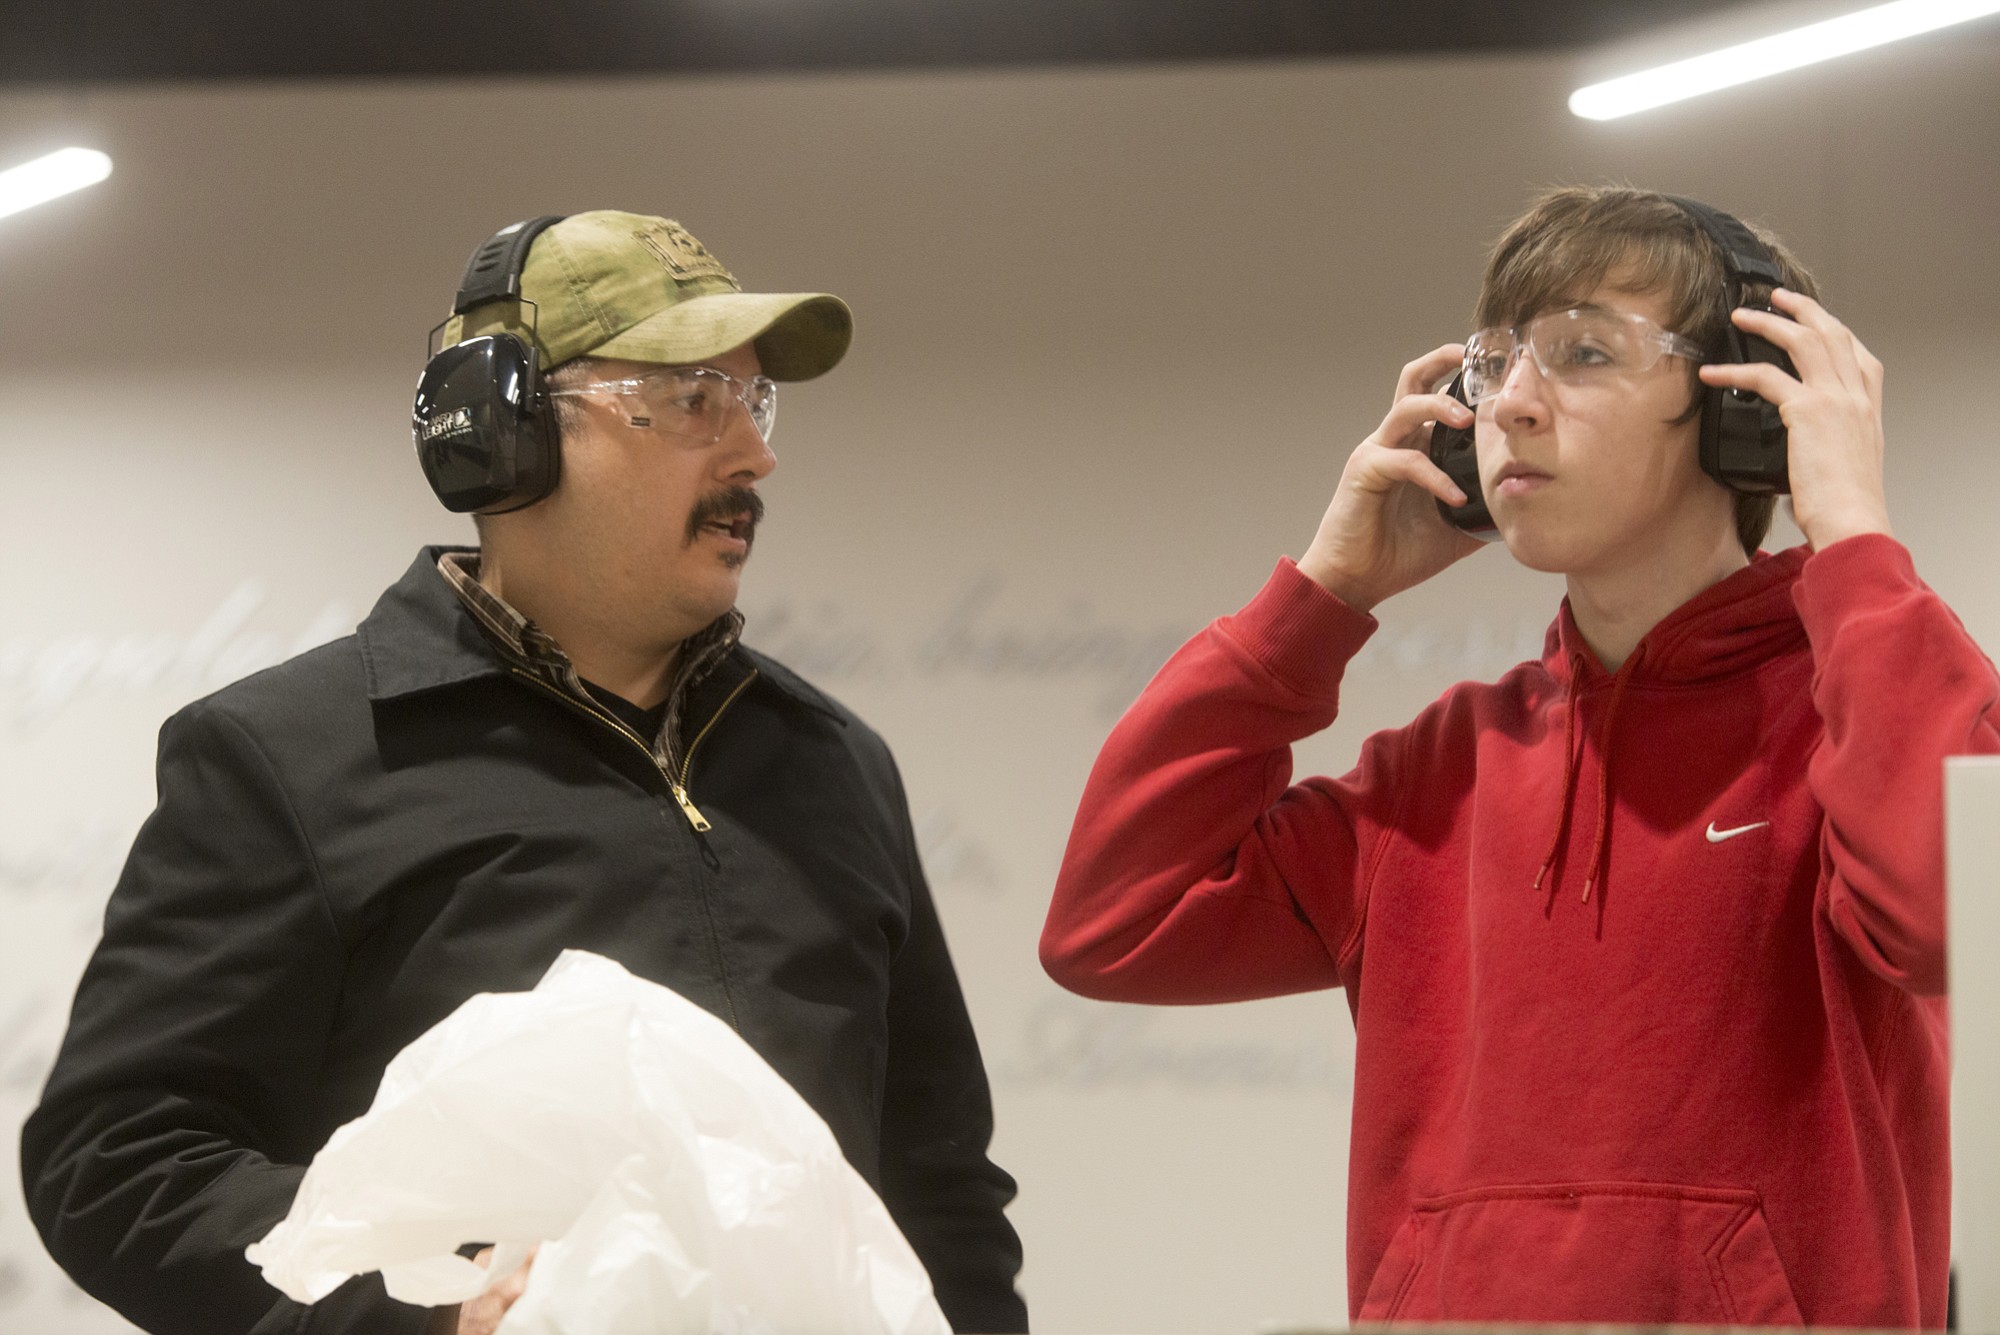 Joaquin Legorreta and his son, Elijah Legorreta, 14, put on their safety goggles and ear protection before they take turns firing at targets at Elite Shooting Sports in Manassas, Va.